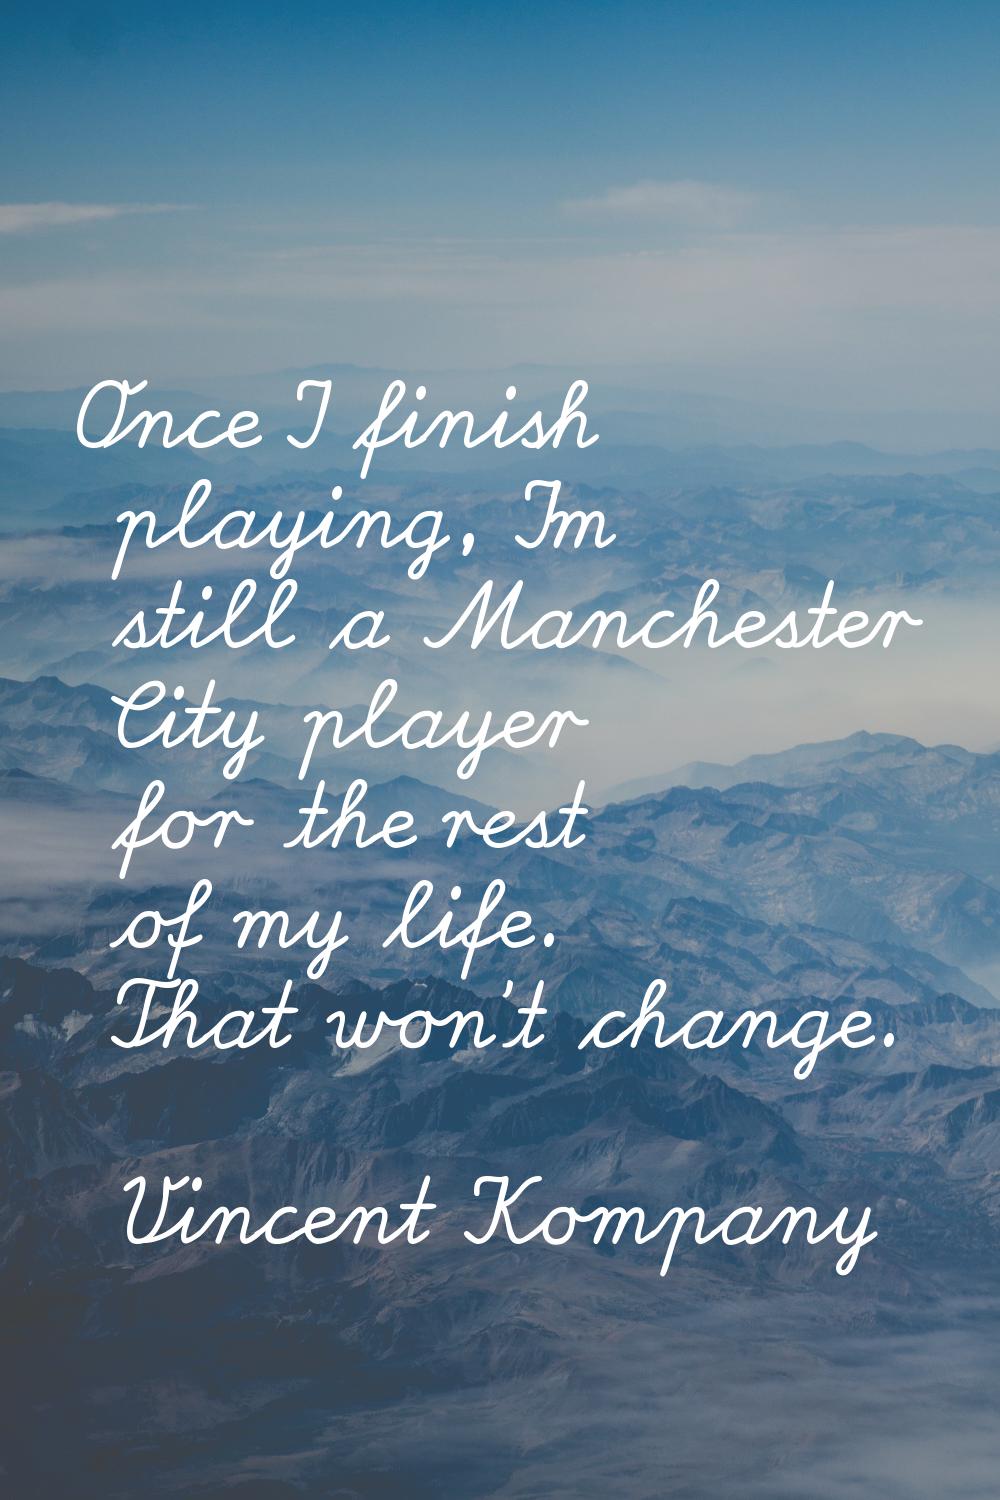 Once I finish playing, I'm still a Manchester City player for the rest of my life. That won't chang